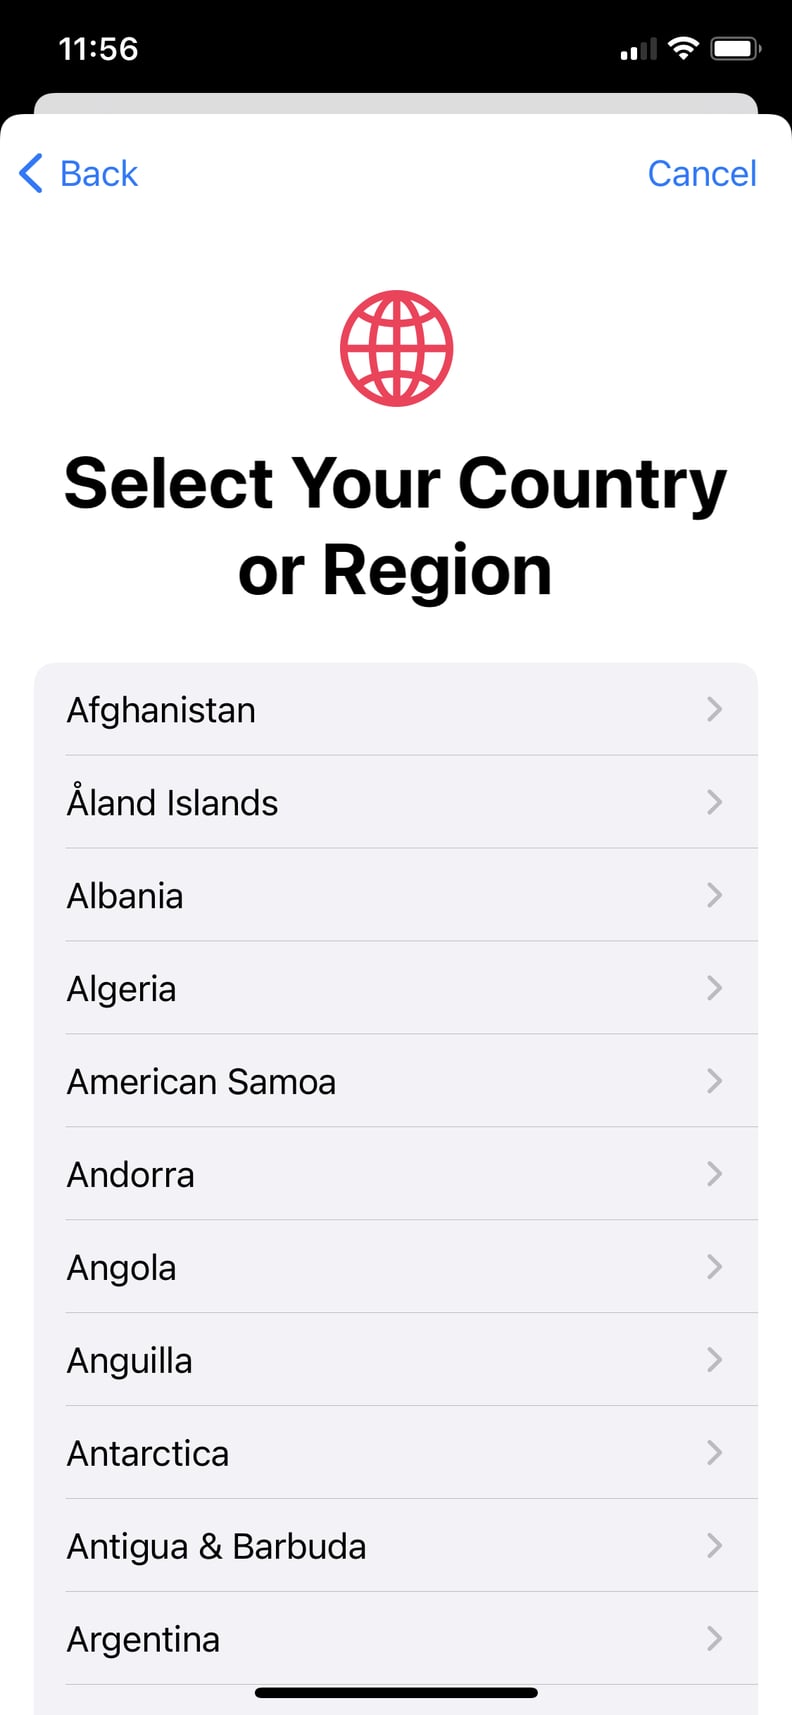 Next, Select Your Country or Region From the Drop-down List